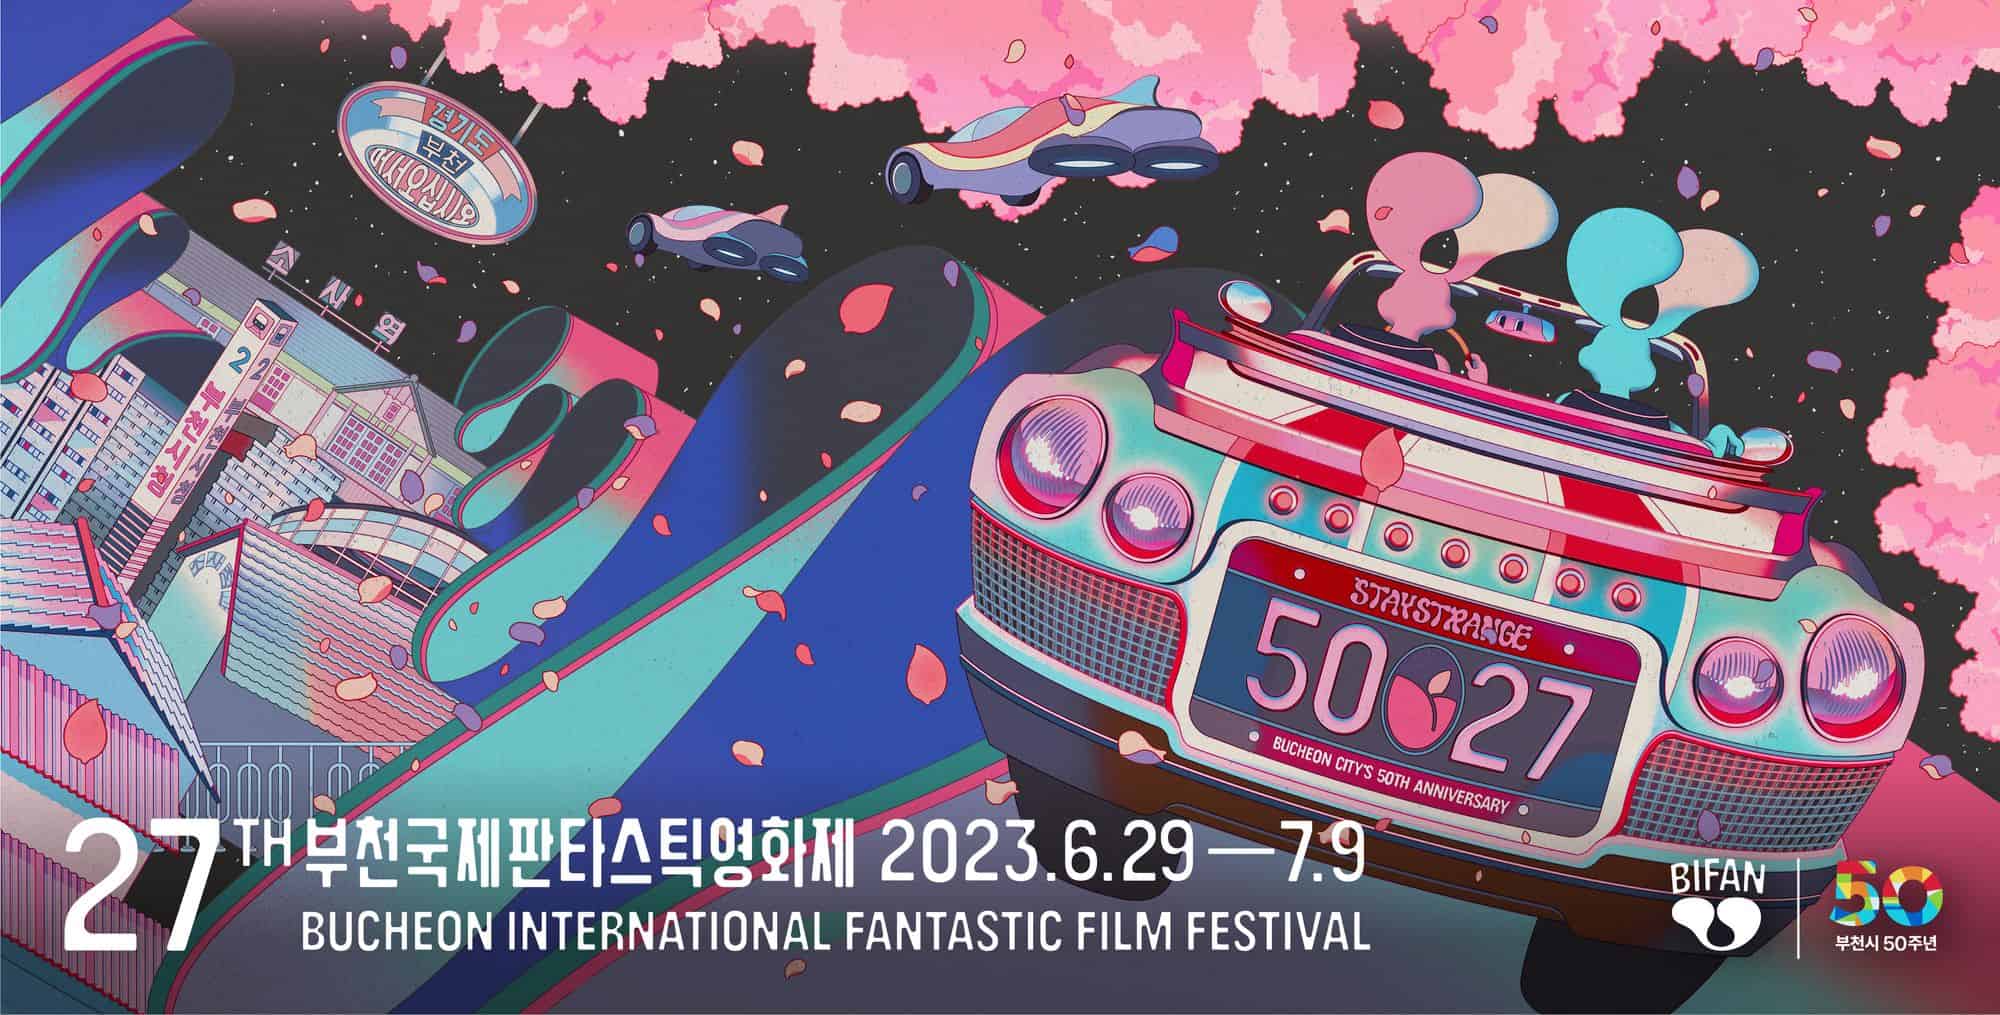 Joseph’s Bucheon International Fantastic Film Festival Reviews: 2035, THE NEW TALE OF RAT WIFE, and HOME